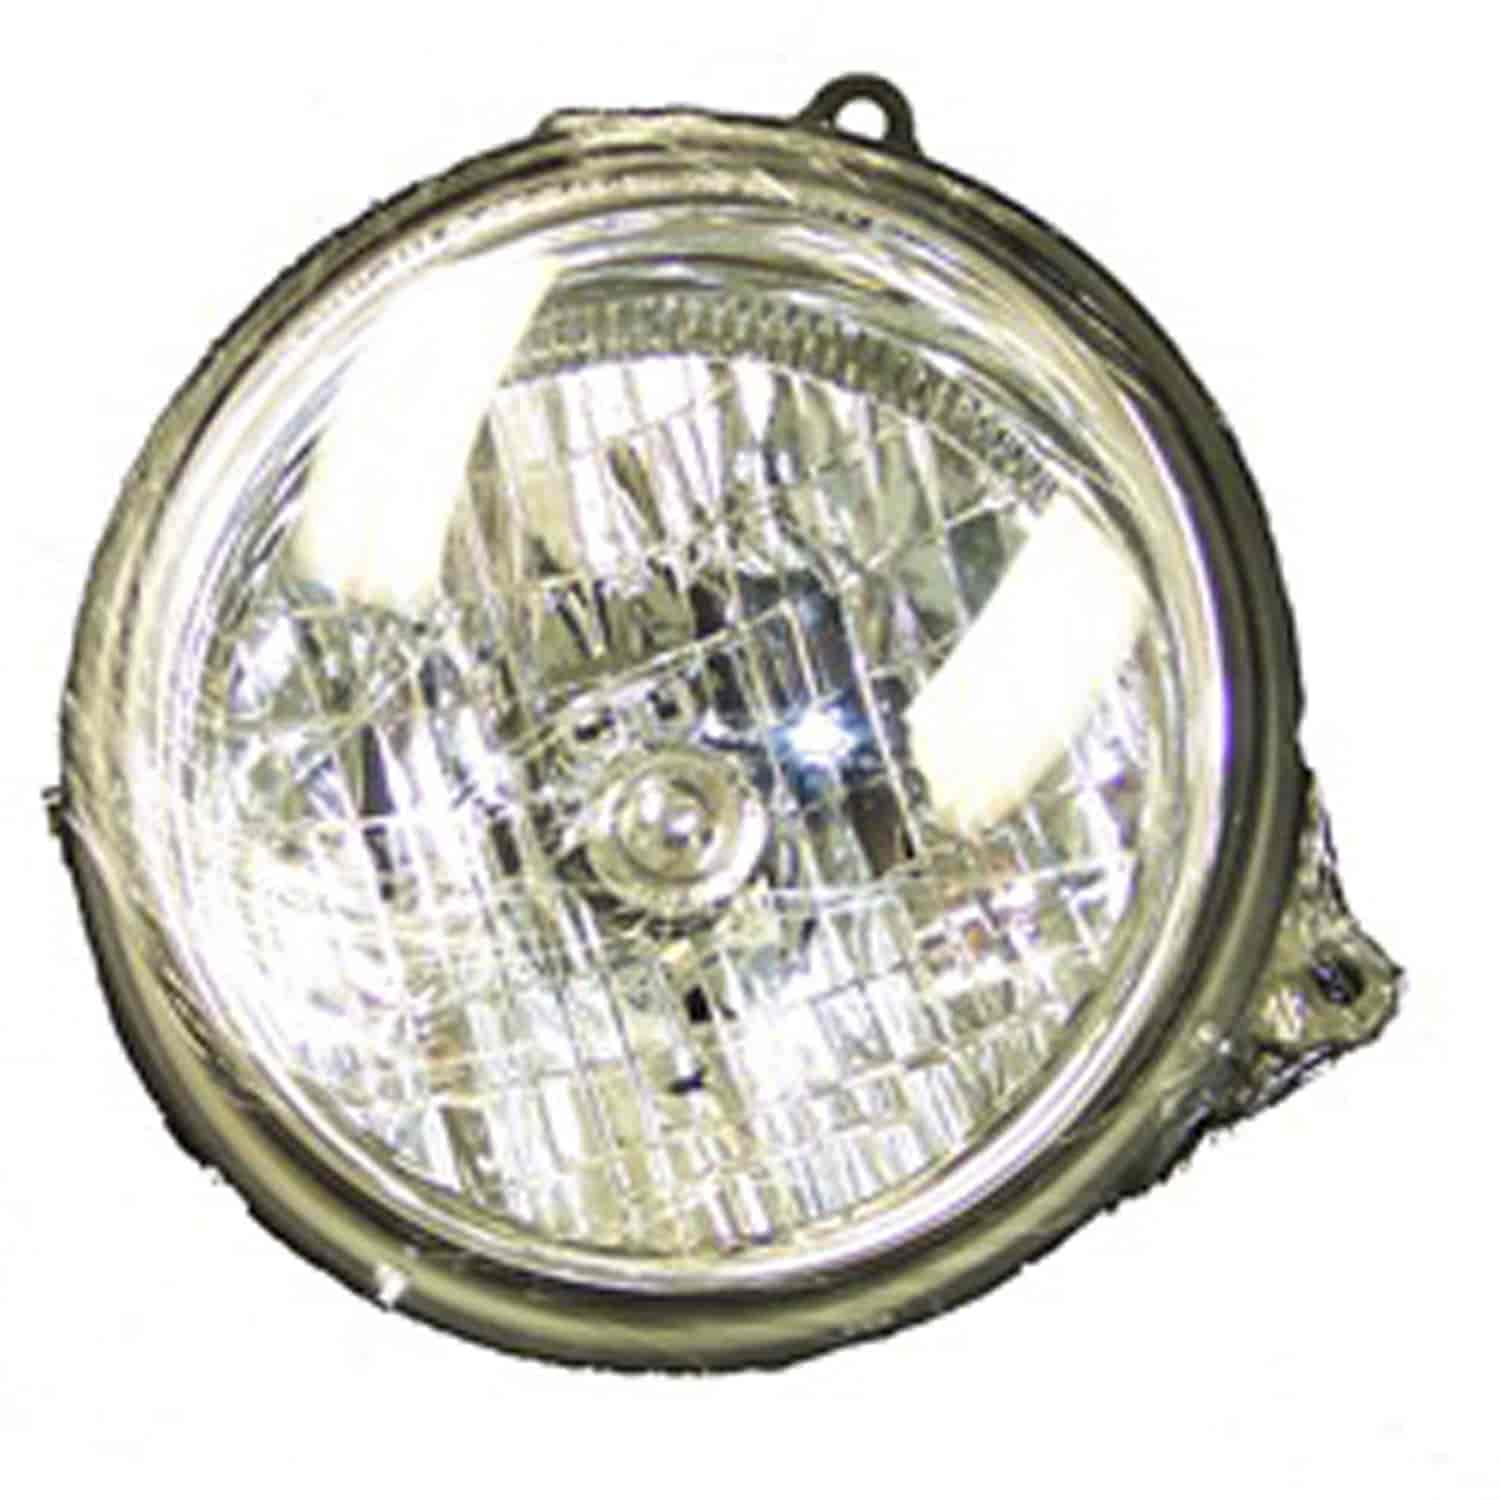 Replacement headlight assembly from Omix-ADA, Fits left side on 2002 Jeep Liberty KJ built before November 05 2002.